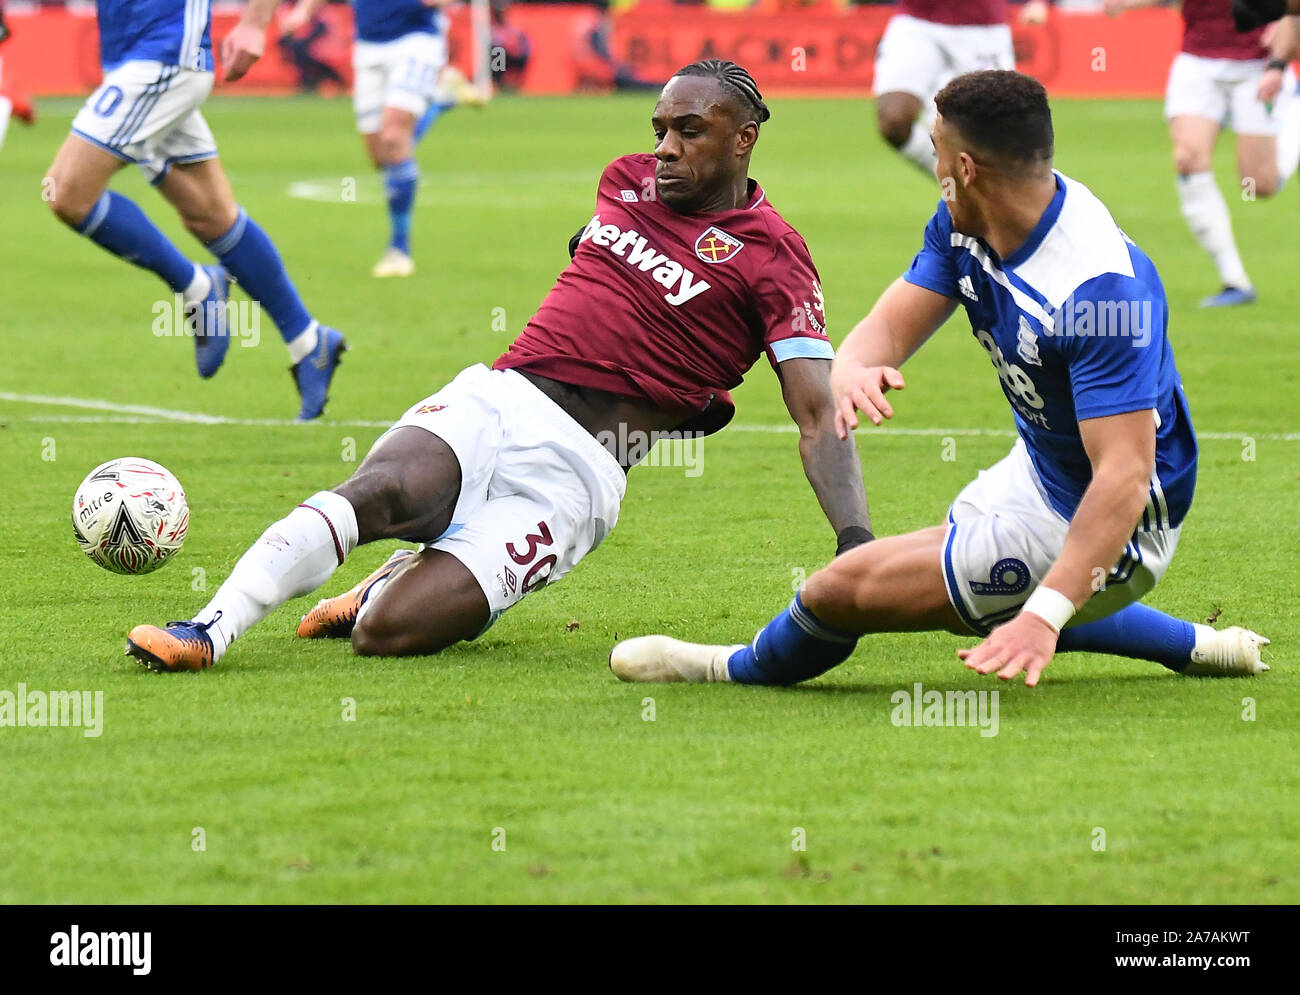 LONDON, ENGLAND - JANUARY 5, 2019: Michail Gregory Antonio of West Ham (L)  and Che Adams of Birmingham (R) pictured during the 2018/19 FA Cup Round 3  game between West Ham United